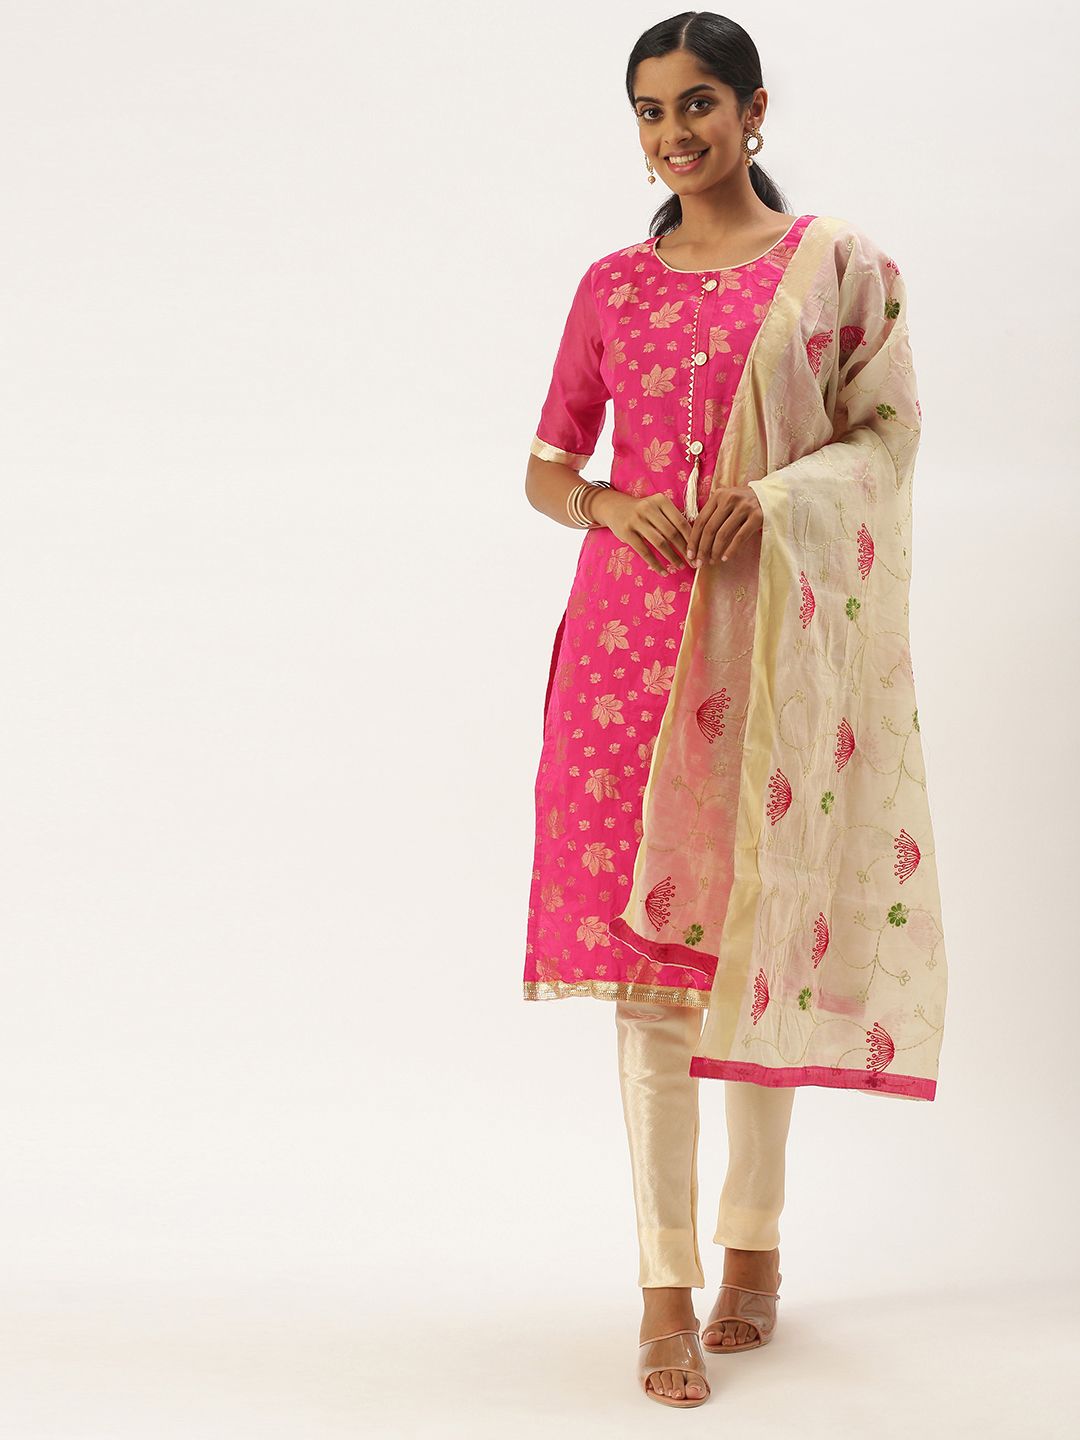 LADUSAA Pink & Beige Unstitched Dress Material Price in India